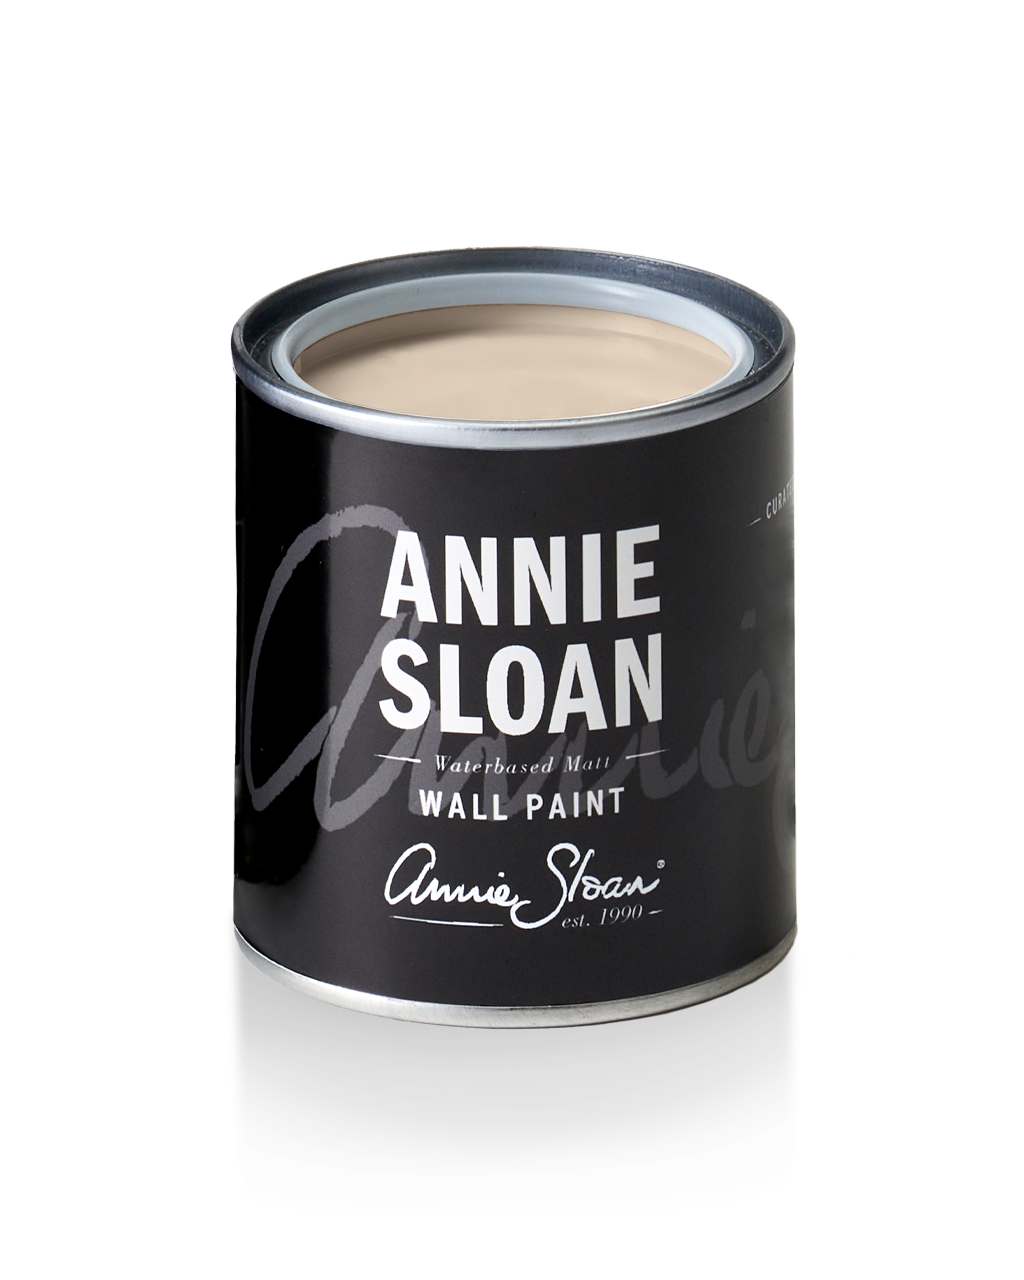 Canvas wall paint by Annie Sloan in 120ml tin